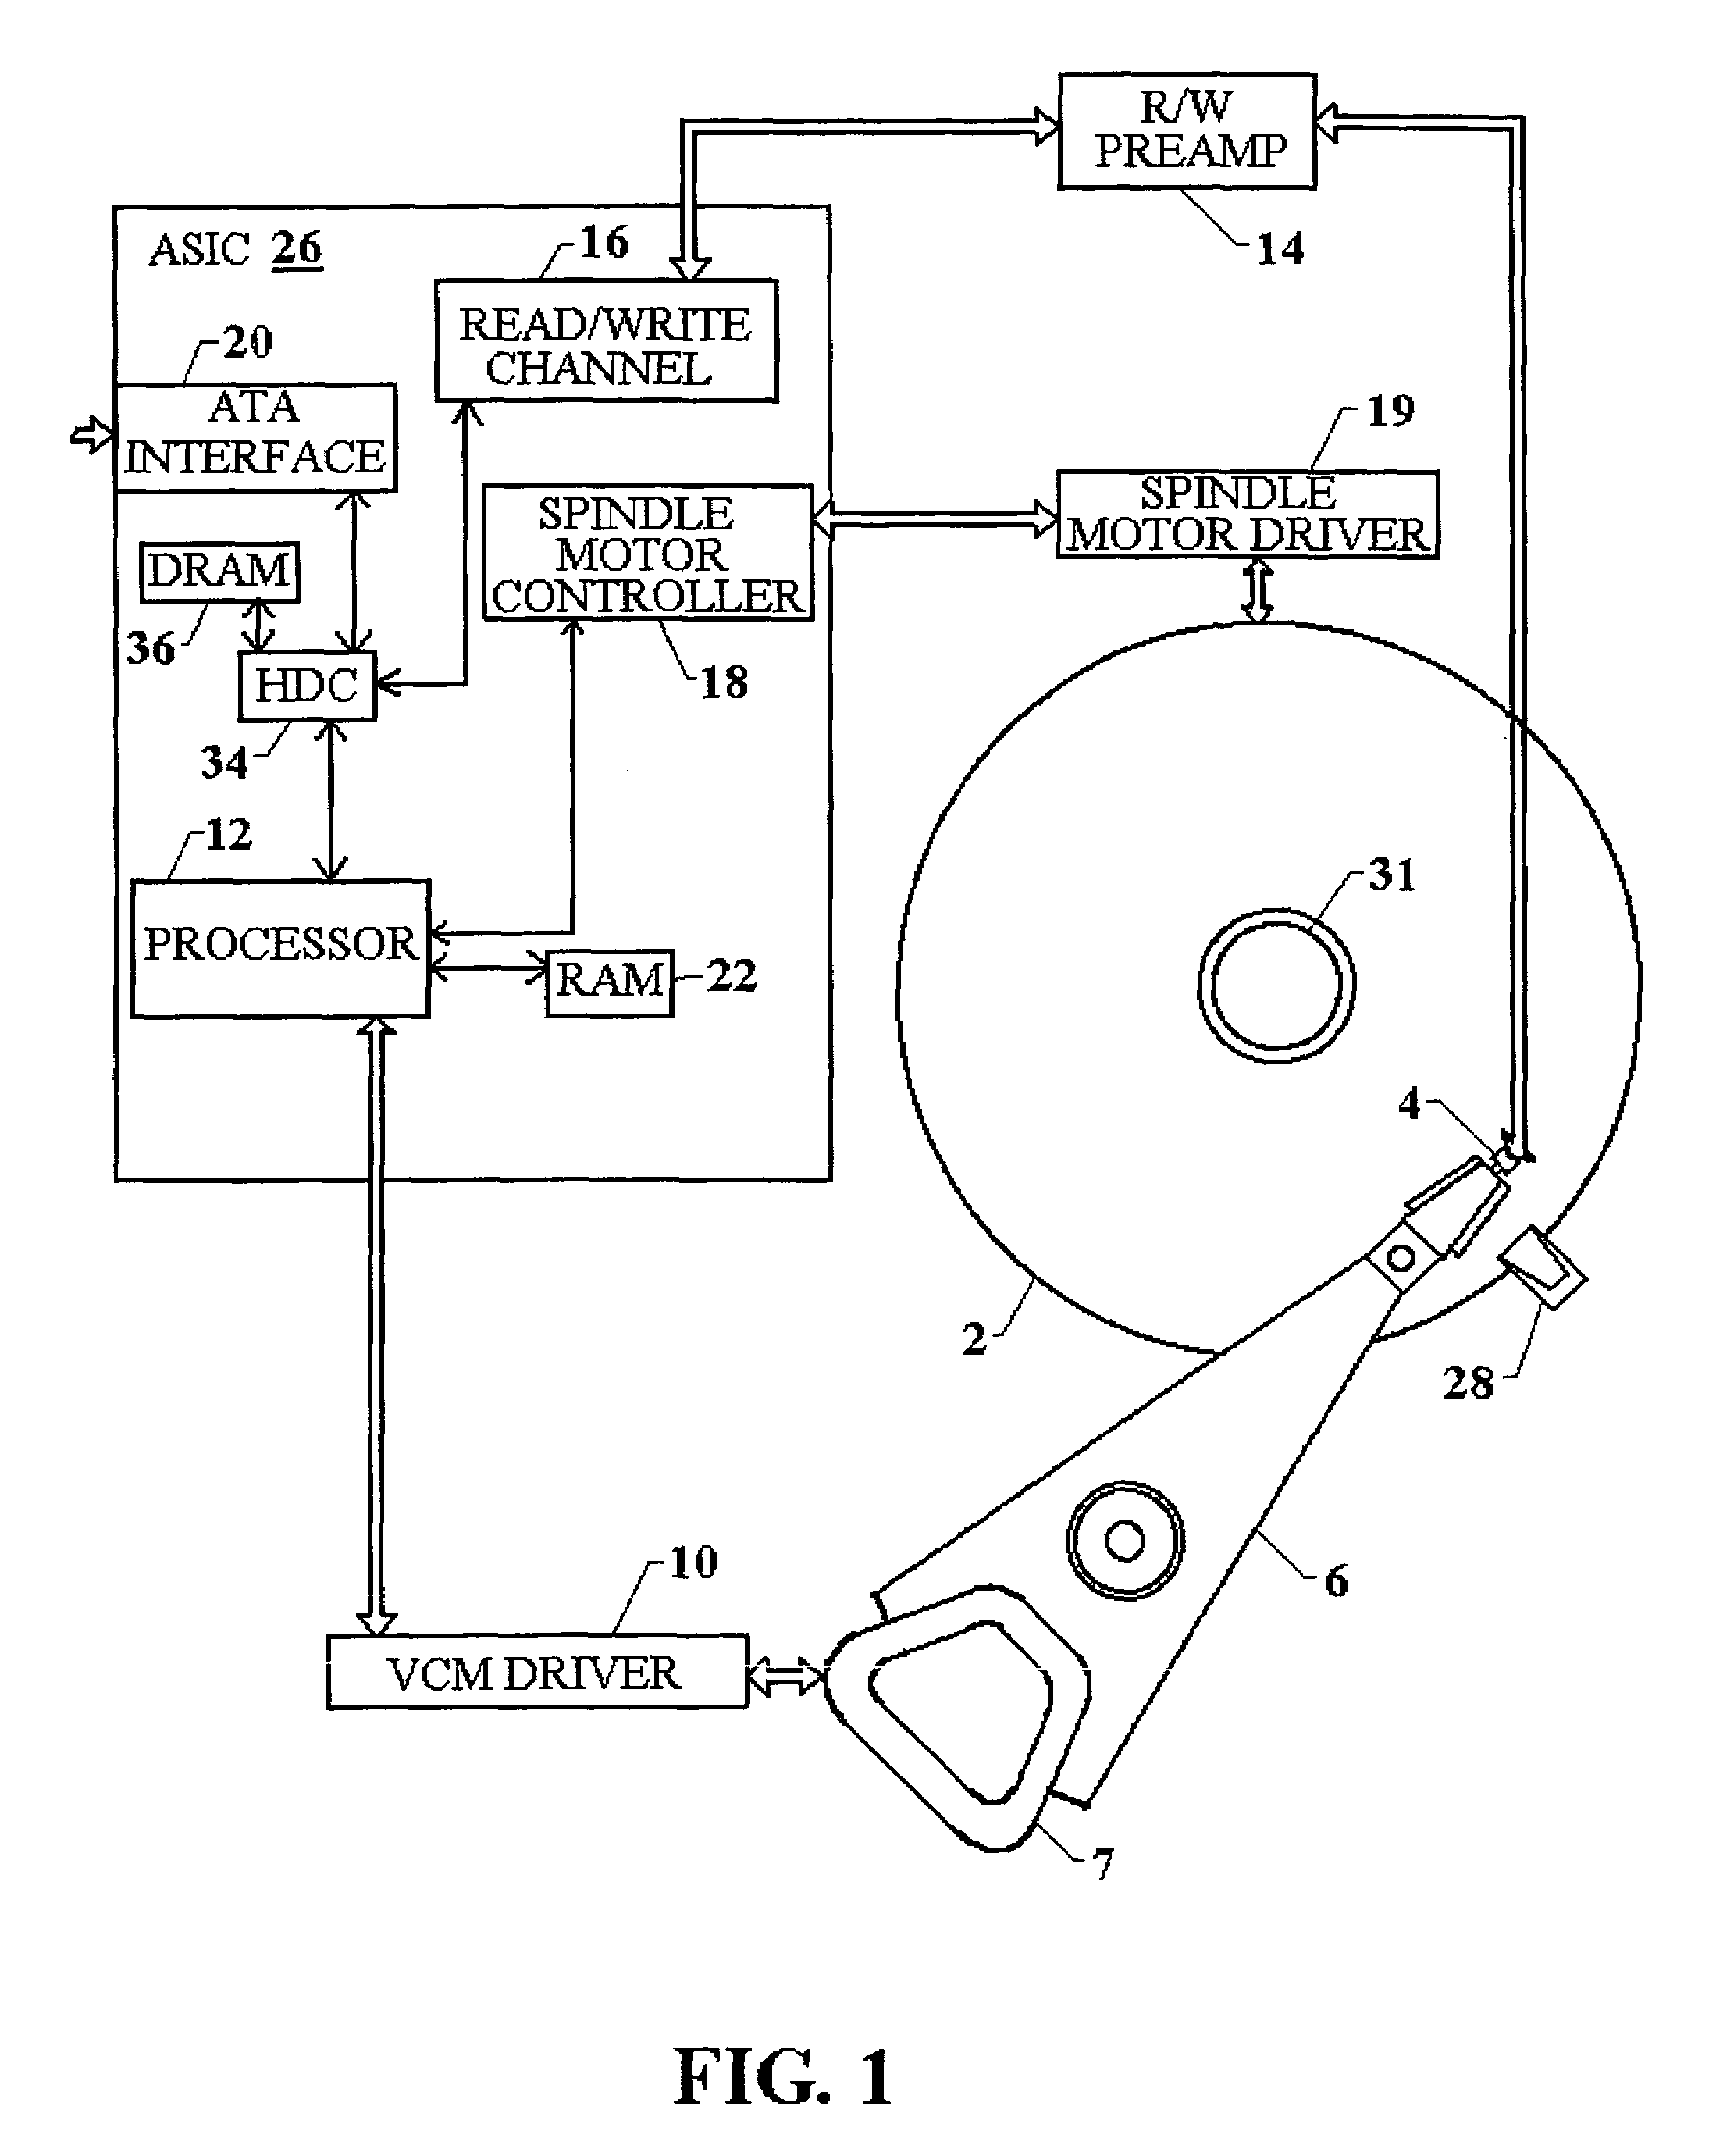 Method for spindle bearing friction estimation for reliable disk drive startup operation